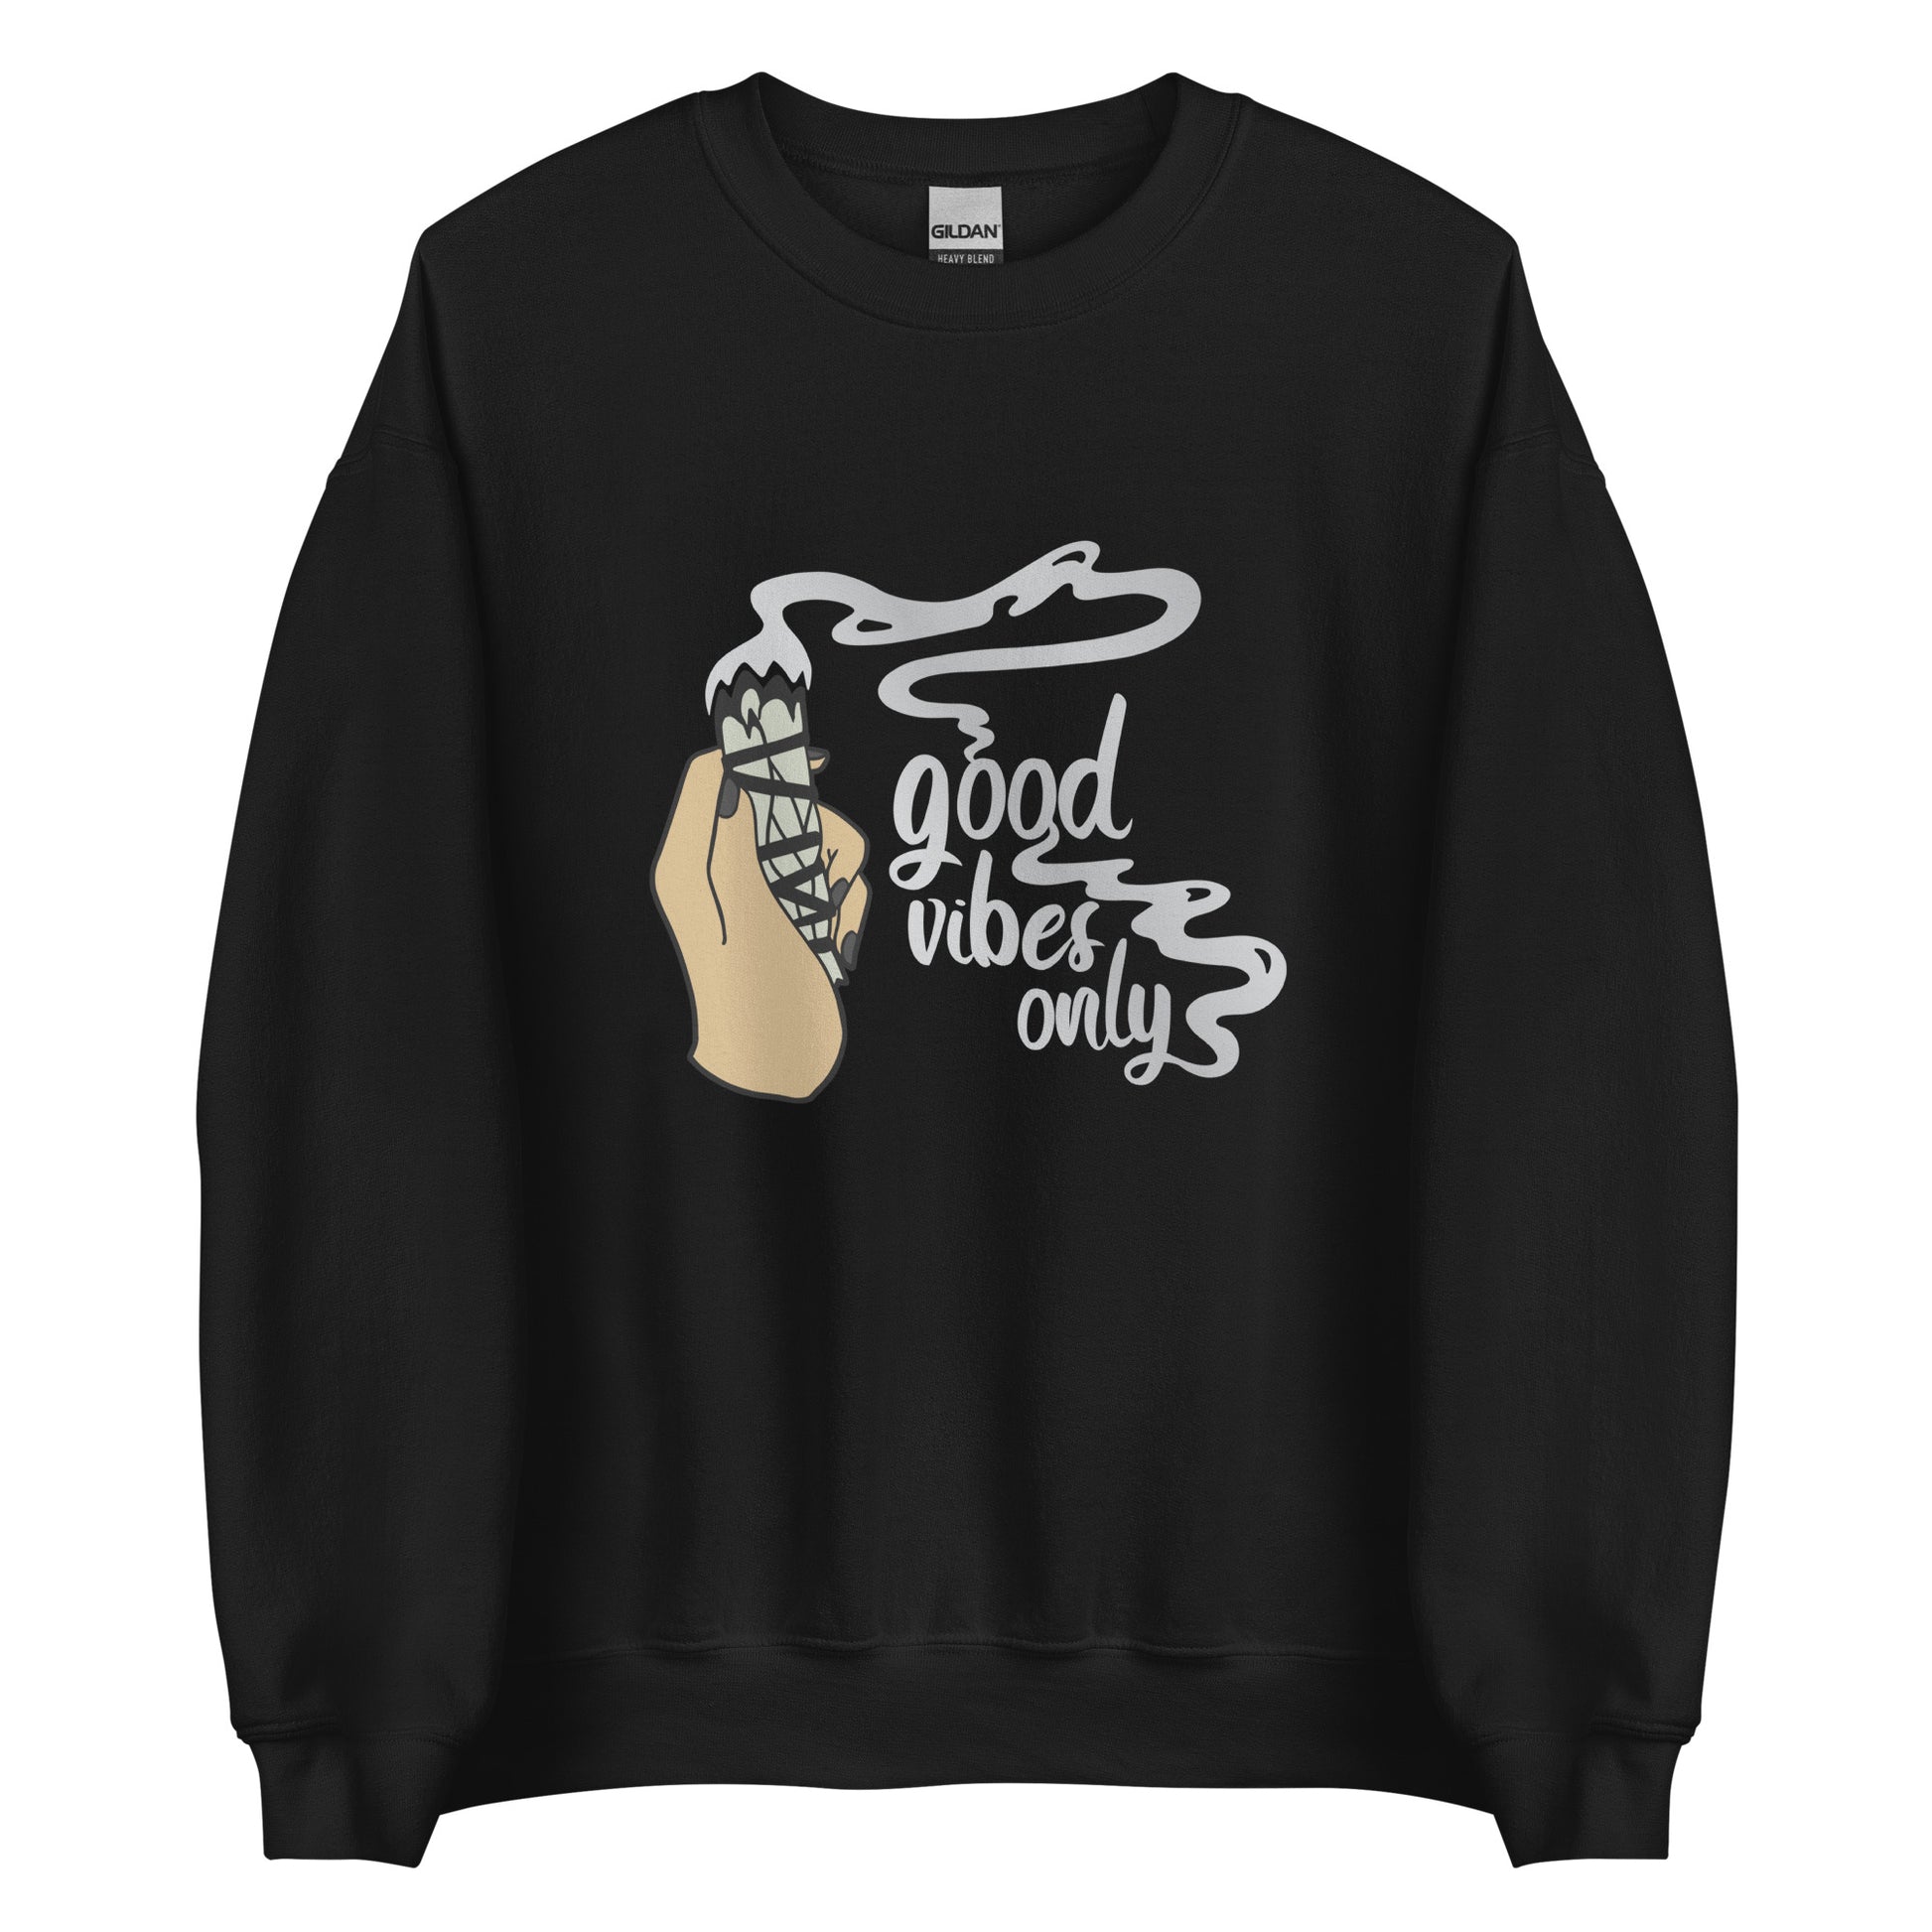 A black crewneck sweatshirt featuring an illustration of a hand holding a sage smudge stick. Smoke flows from the tip of the sage and forms text reading "Good vibes only"